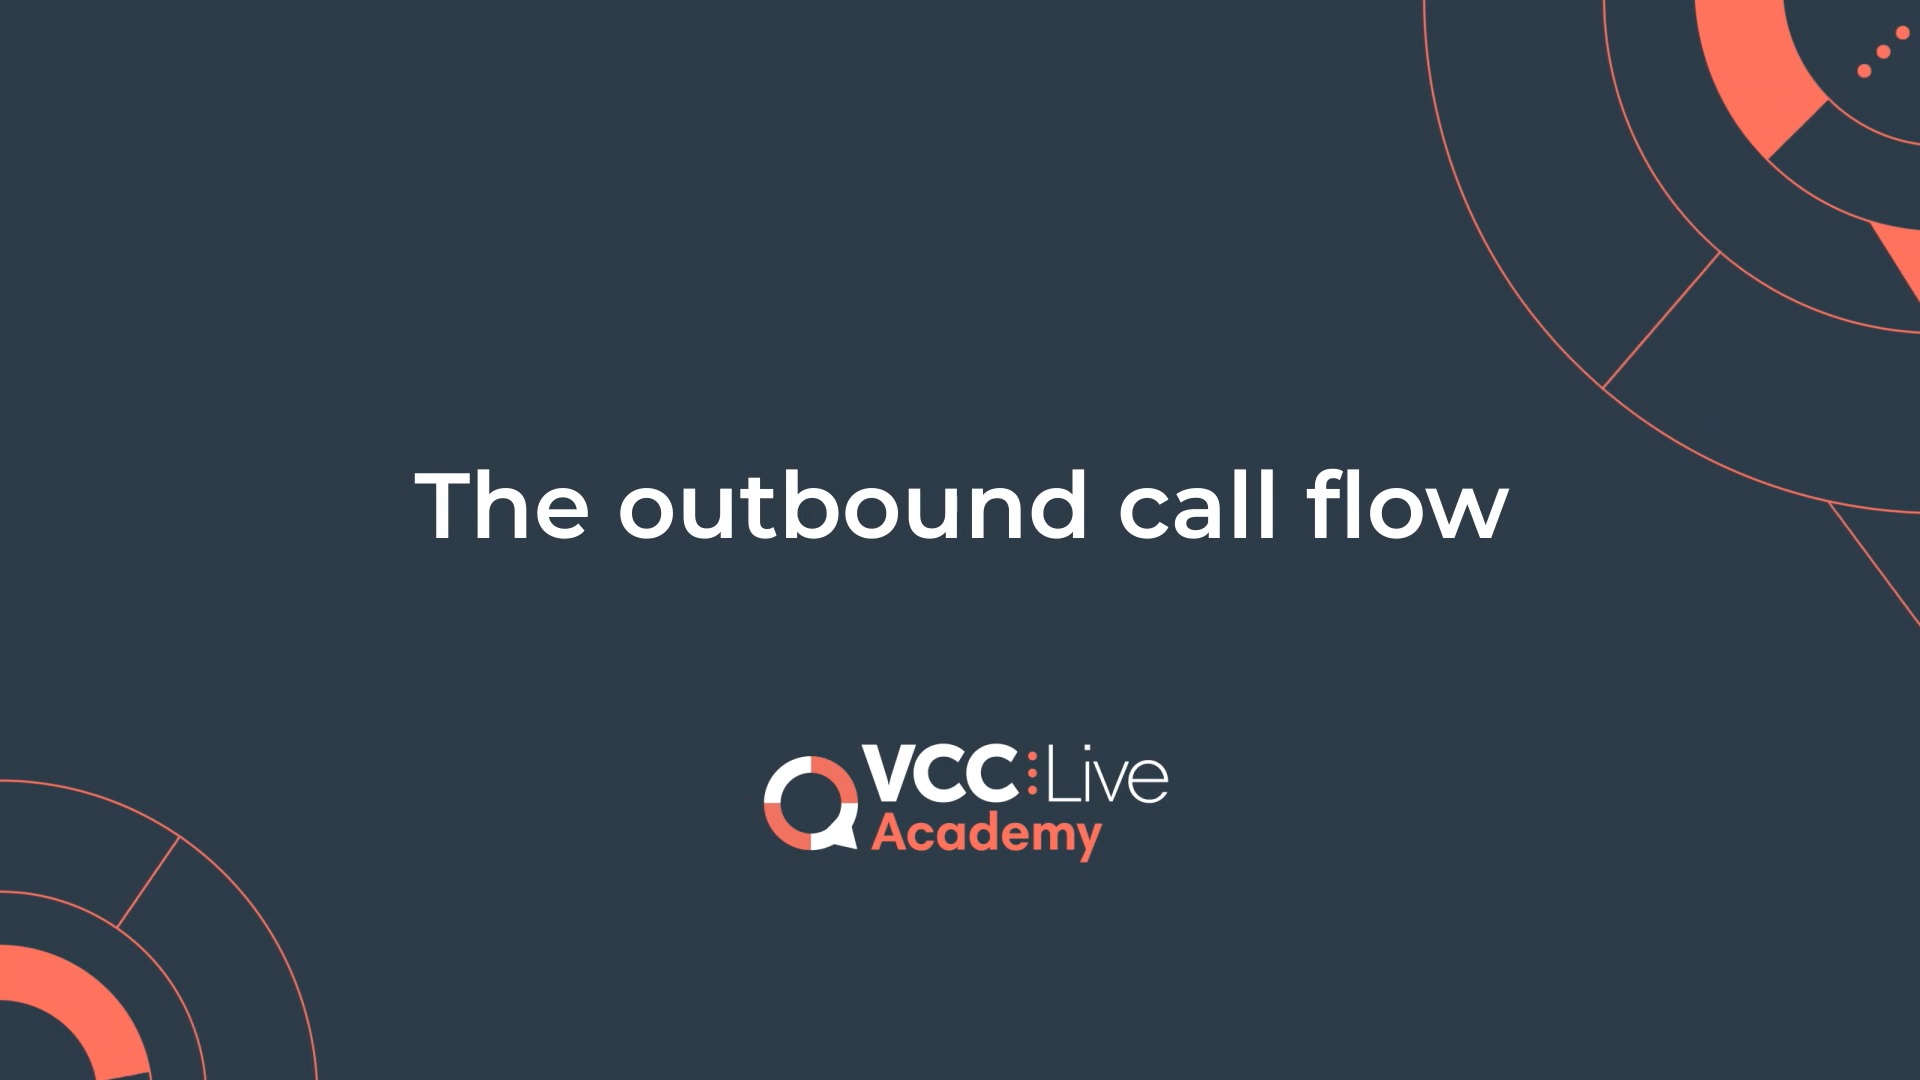 https://vcc.live/wp-content/uploads/2022/08/dialer-course-outbound-call-flow.jpg